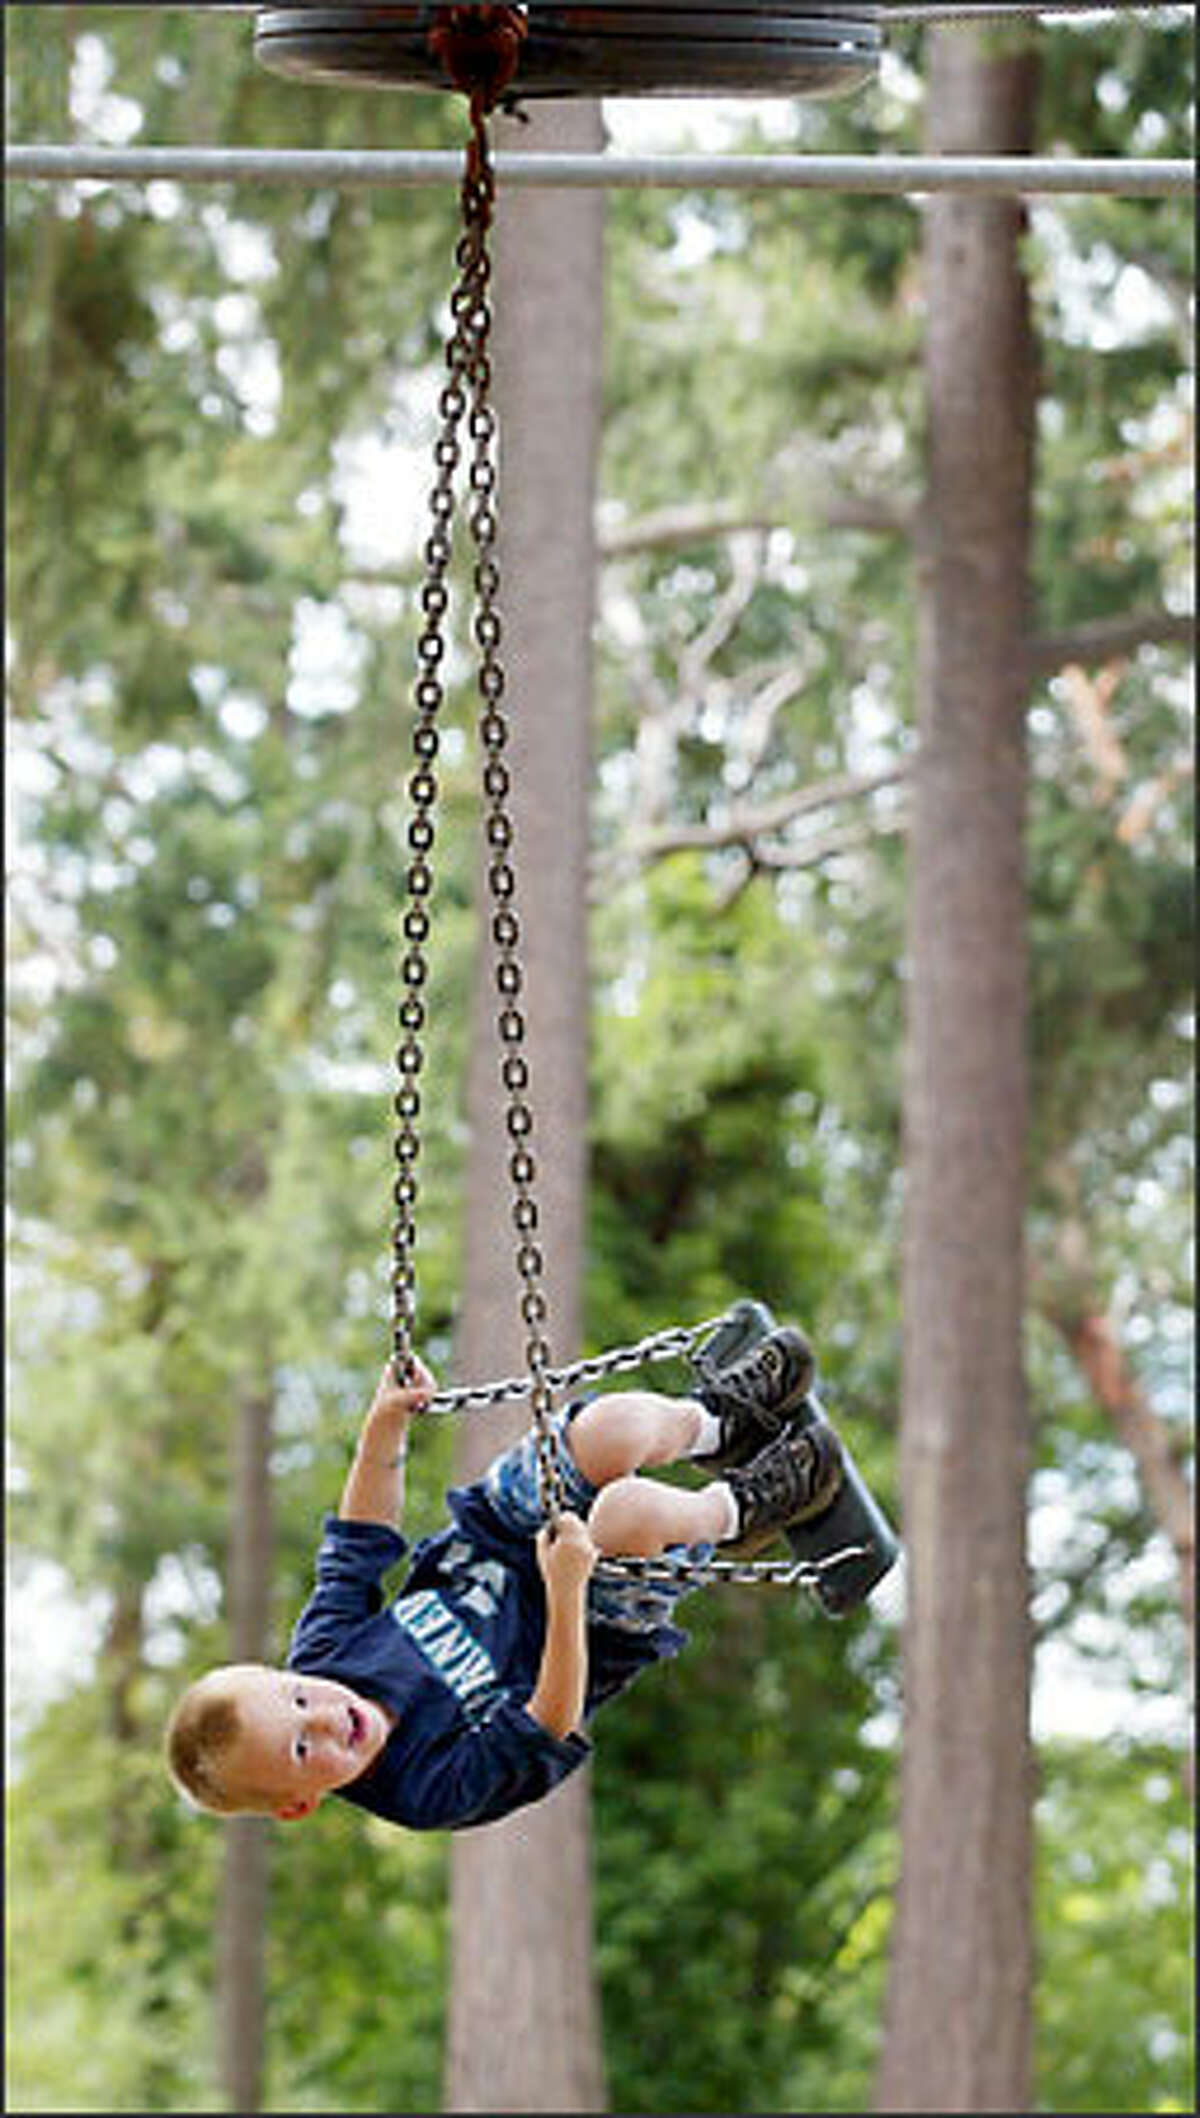 Give 5-year-old Morgan Higgins of West Seattle extra style points for his flashy little maneuver on the 50-foot-long cable glide at West Seattle's Lincoln Park. It may not look like it in this photo, but the cable glide is a safe, low-height ride.